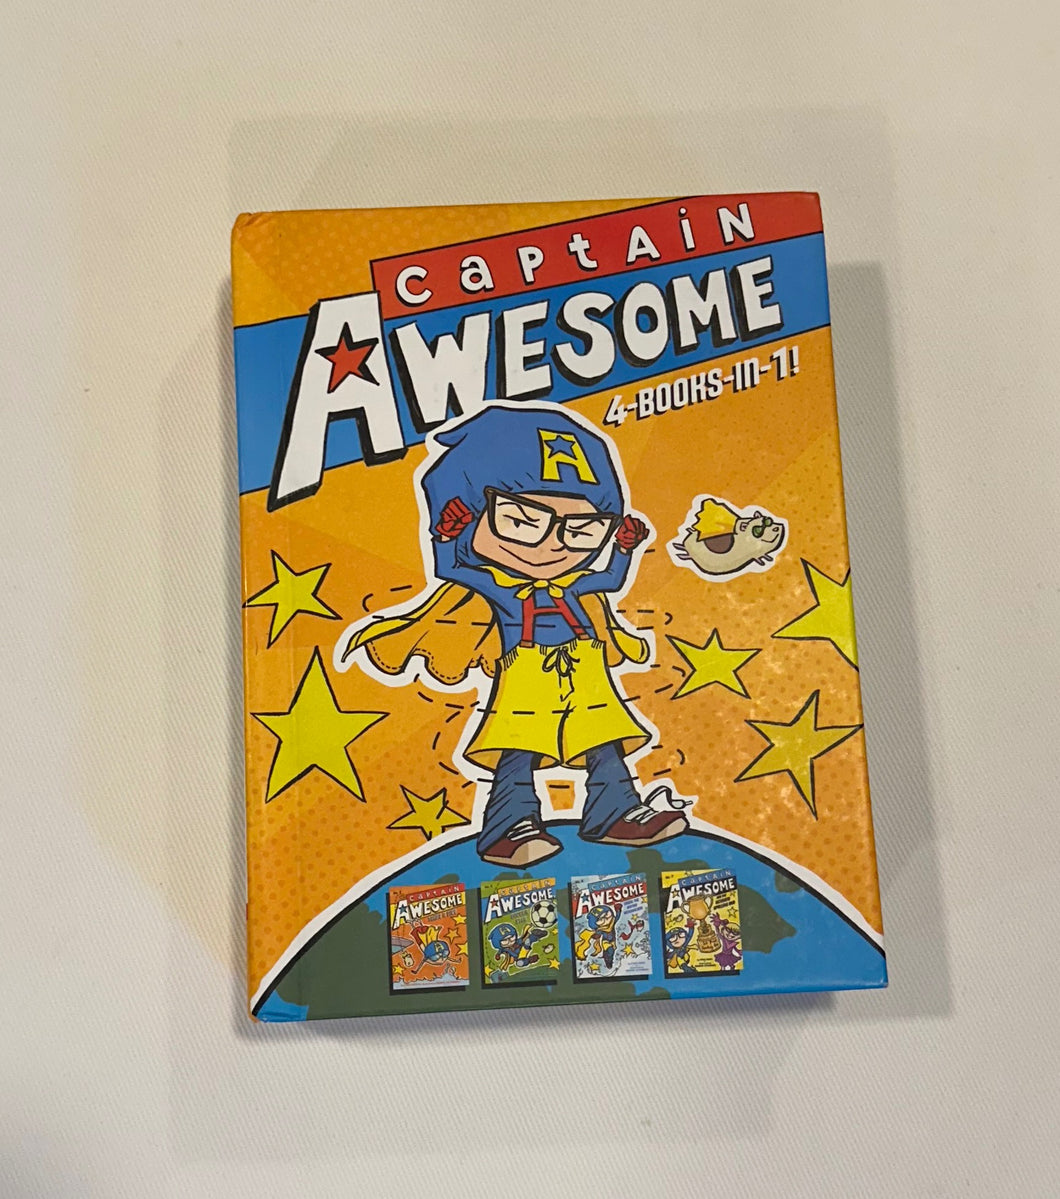 Captain Awesome chapter book - 4 books in 1